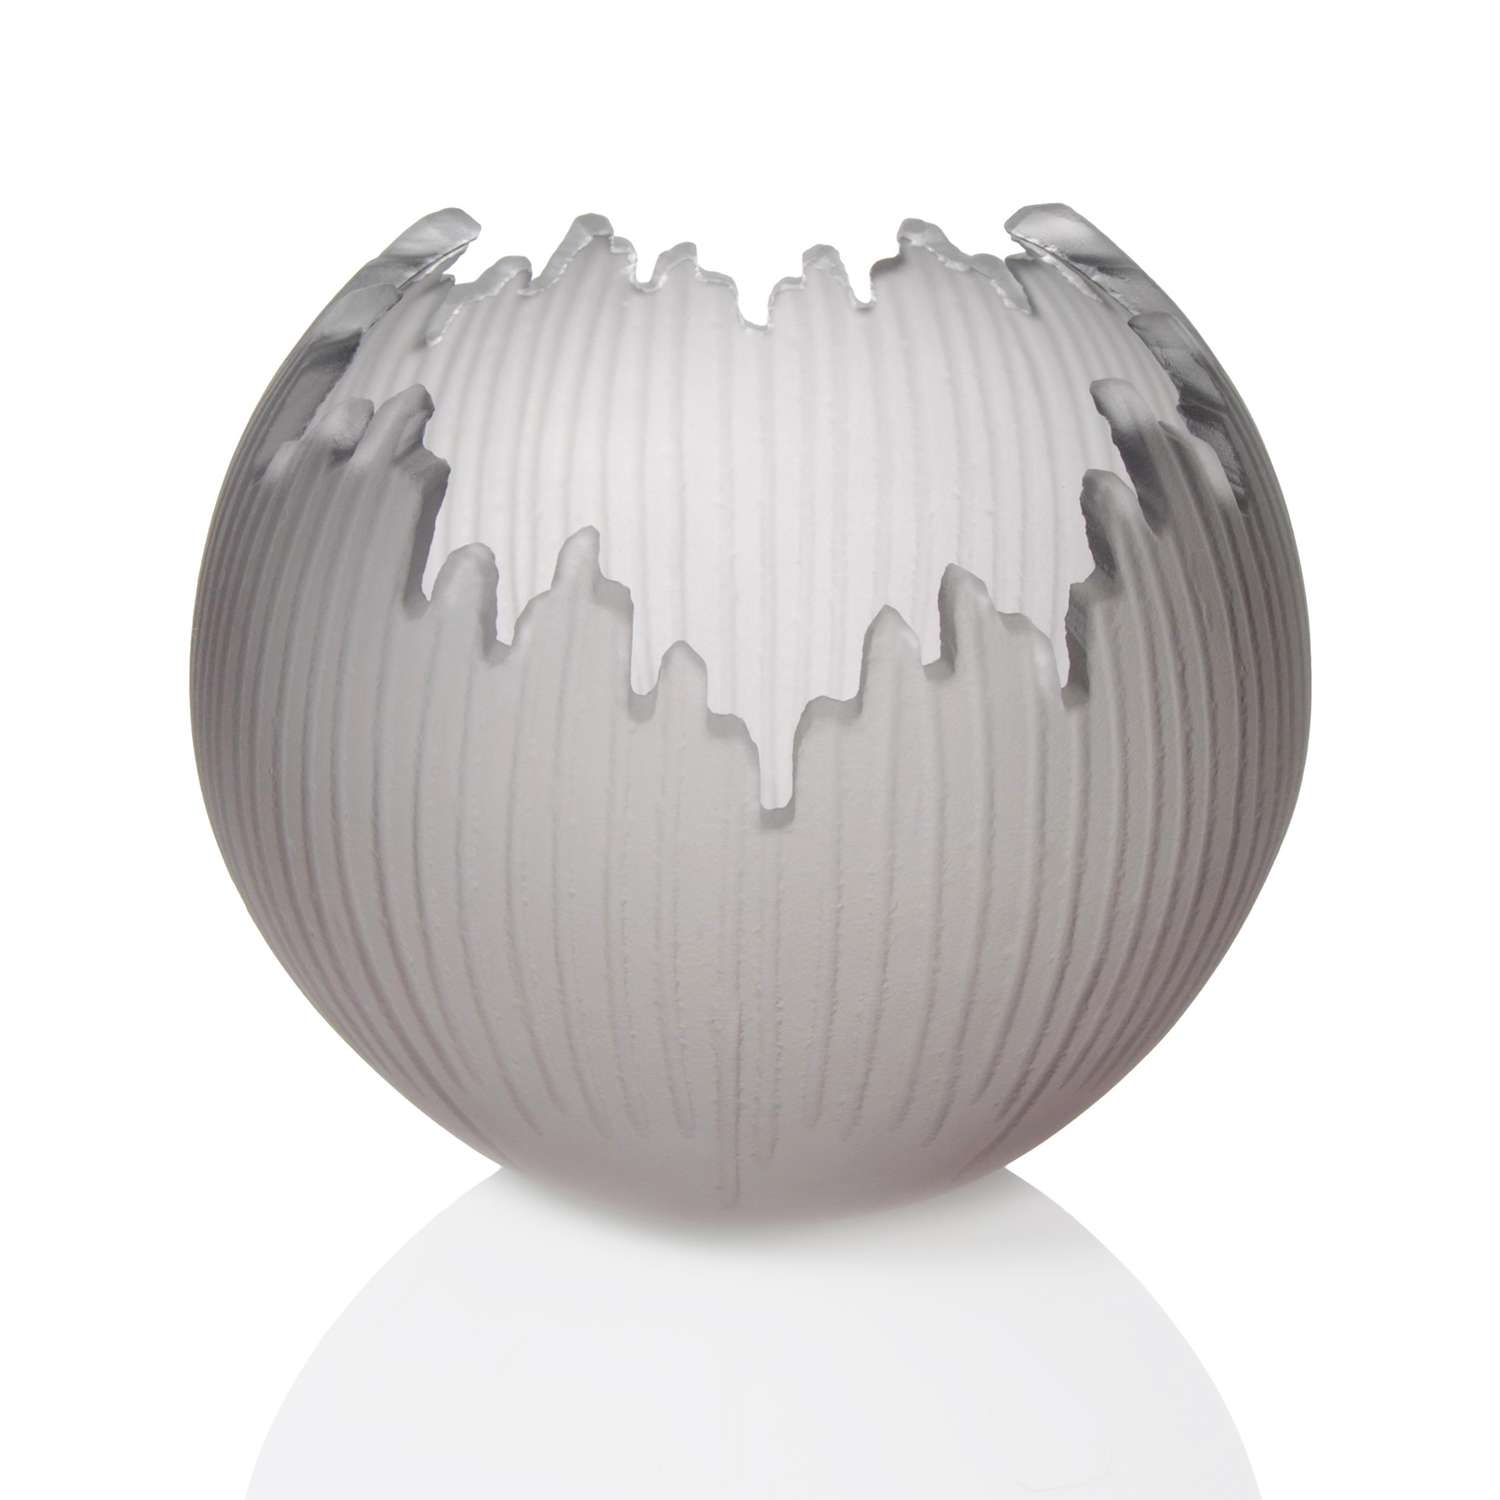 Courtney Downman: Grey Saw Carved Glass Votive Product Image 1 of 1